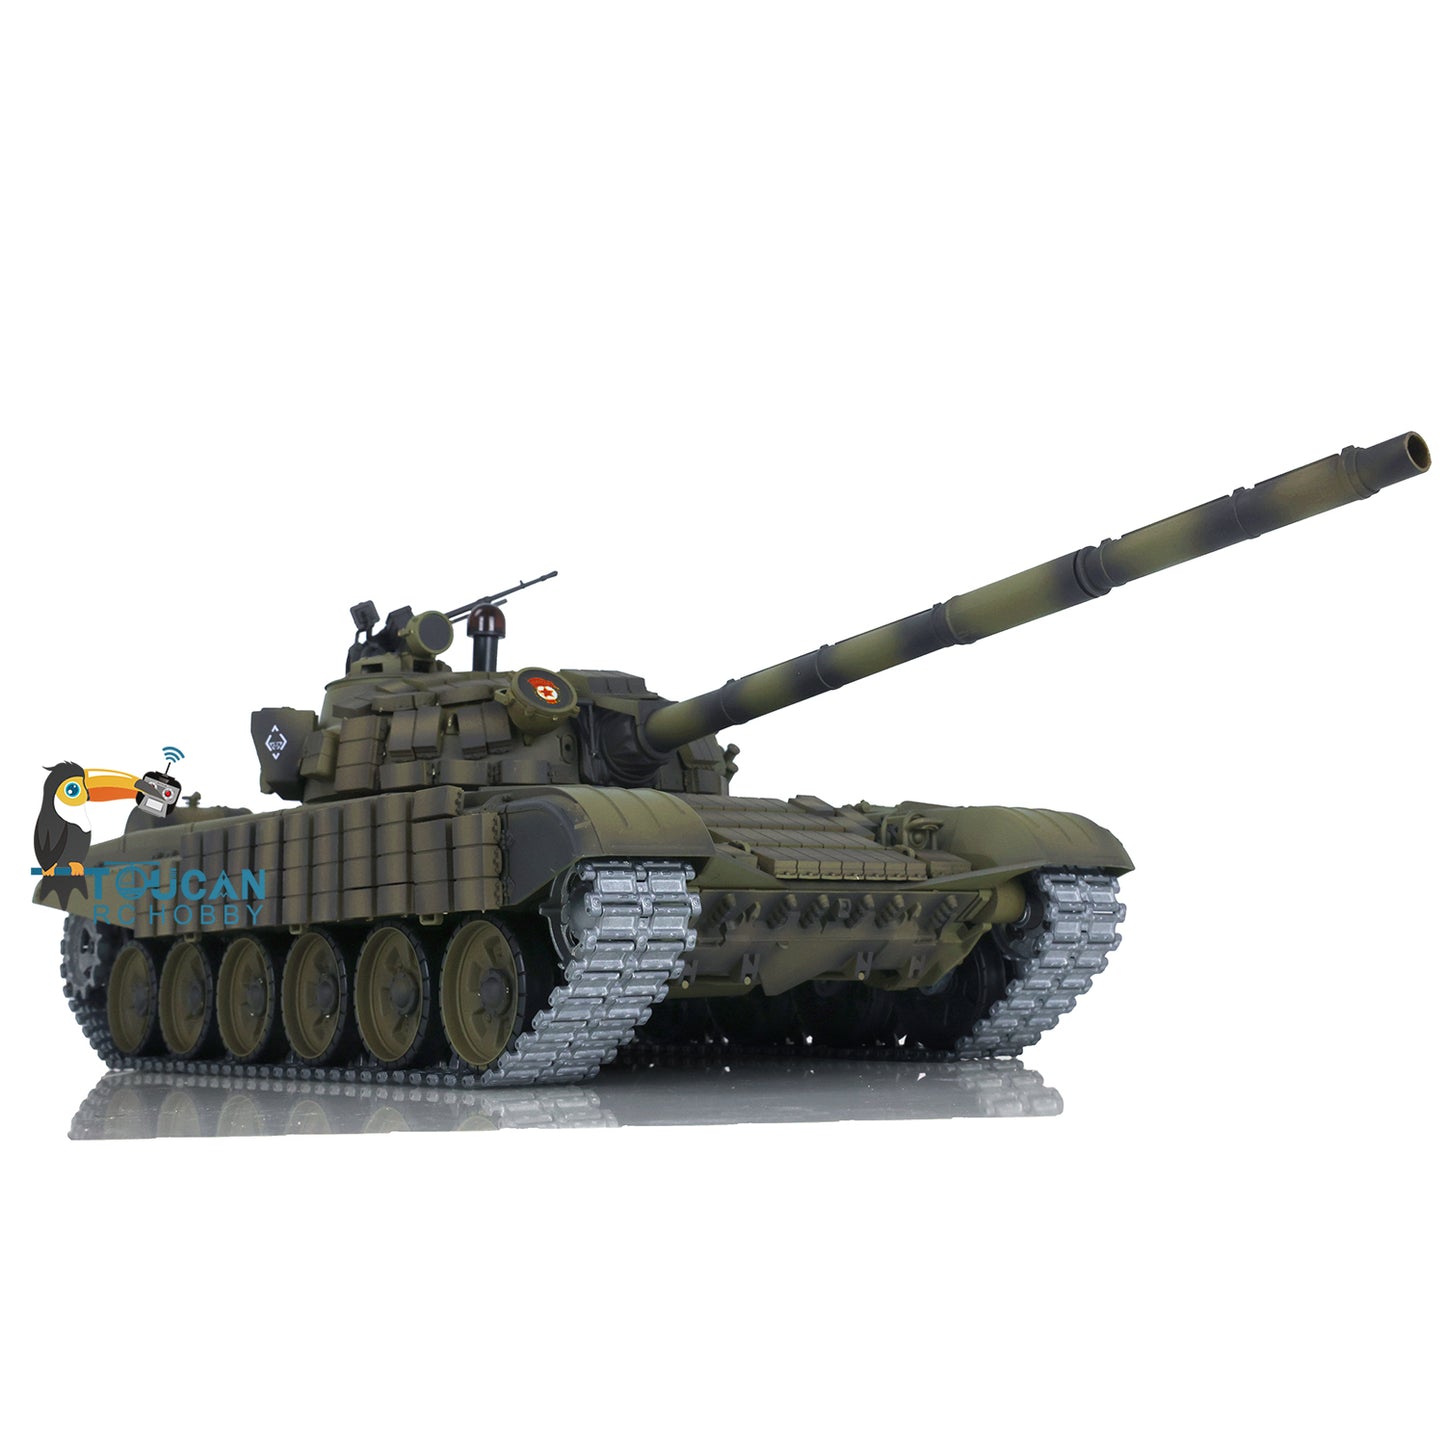 US STOCK Henglong Radio Controlled Tank T72 1/16 Scale 7.0 Mainboard Metal Battle Electric Tank Tracked Vehicle W/ Battery Charger